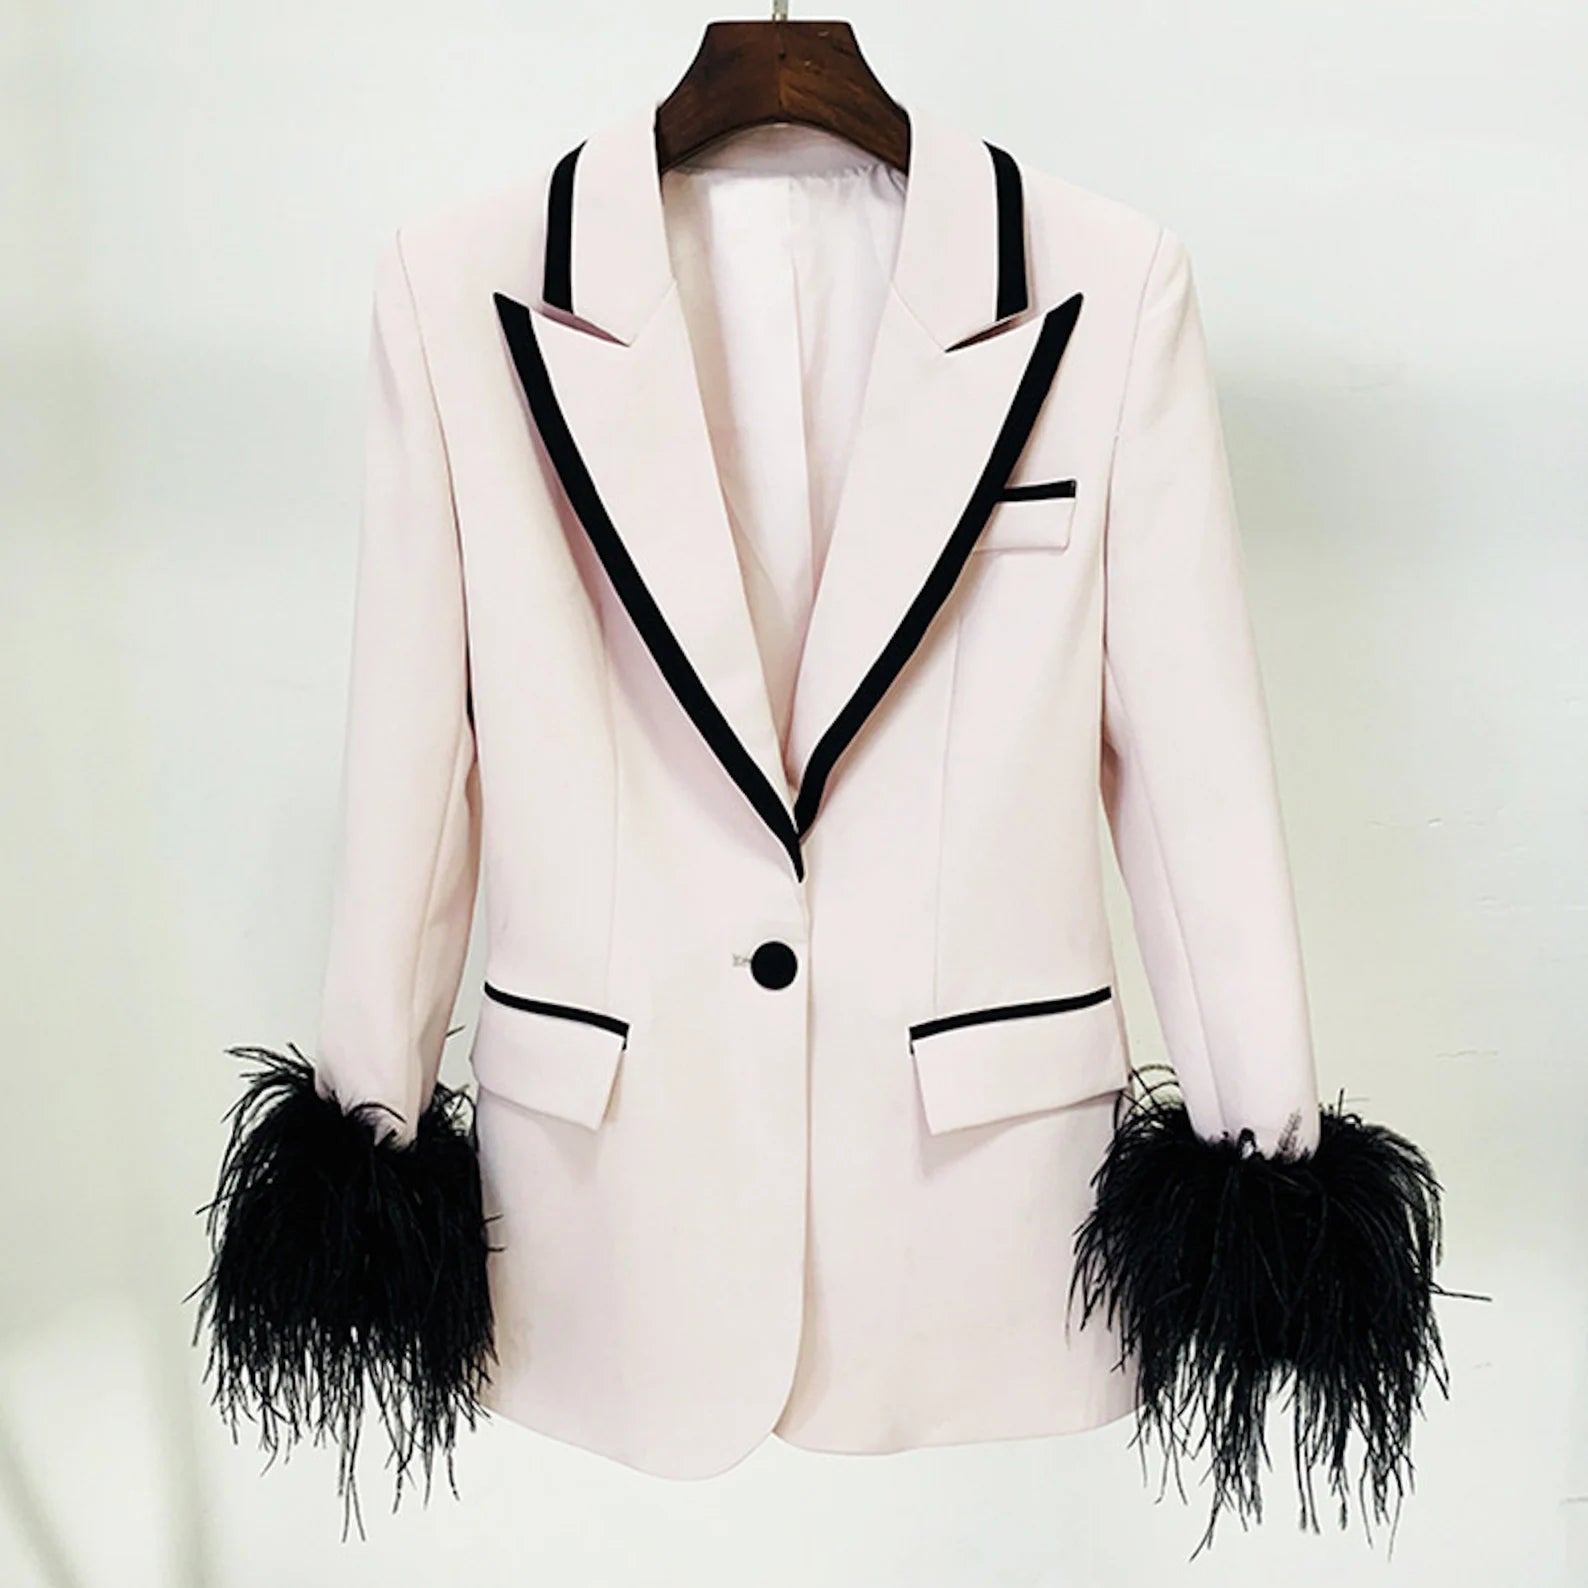 Women's Loose Fit Faux Large Feather Cuffs One Button Black Trim Blazer Jacket Light Pink  This Fluffy Feather Cuff Jacket is both glamorous and casual. For a chilly night, pair it with an evening gown or jeans for a more relaxed style. It can be worn for work, shopping, and tea parties throughout the day, as well as for dinner, partying, and other activities at night.